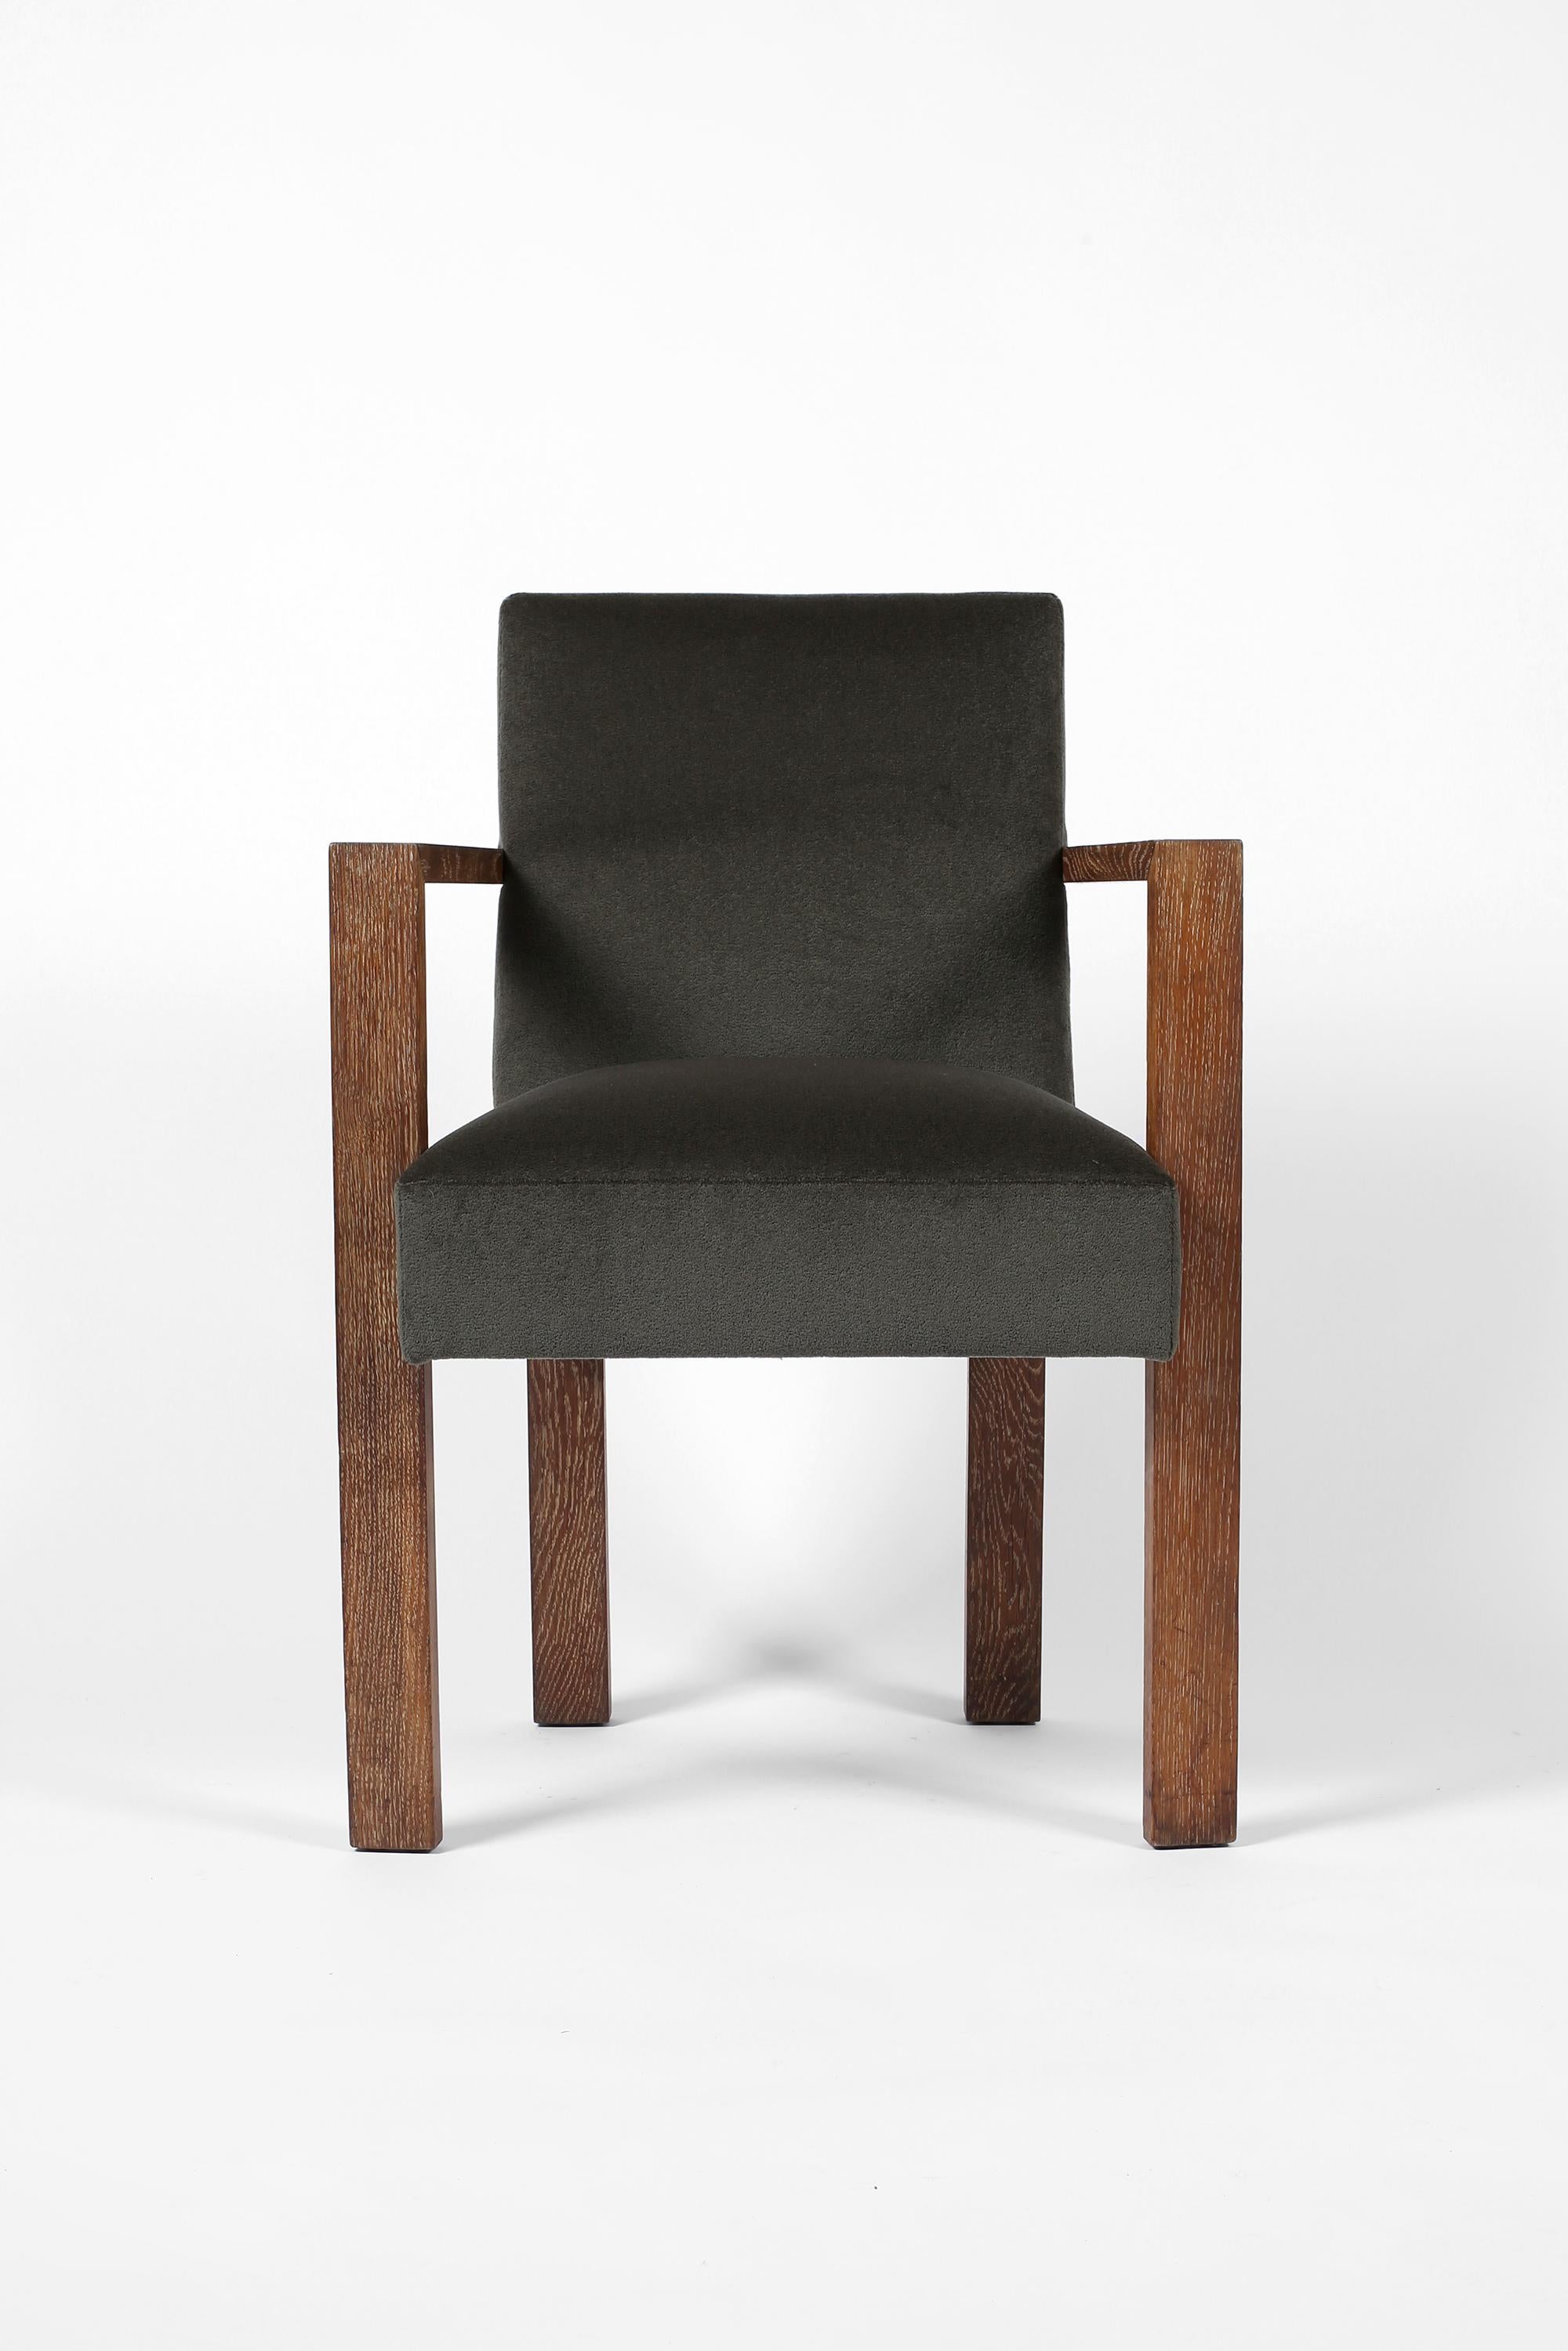 A chic modernist Art Deco armchair with cubic frame in limed oak, reupholstered in Alexander - ‘Loden’ - a muted green-grey wool mohair by Dedar Milano. French, c. 1940.